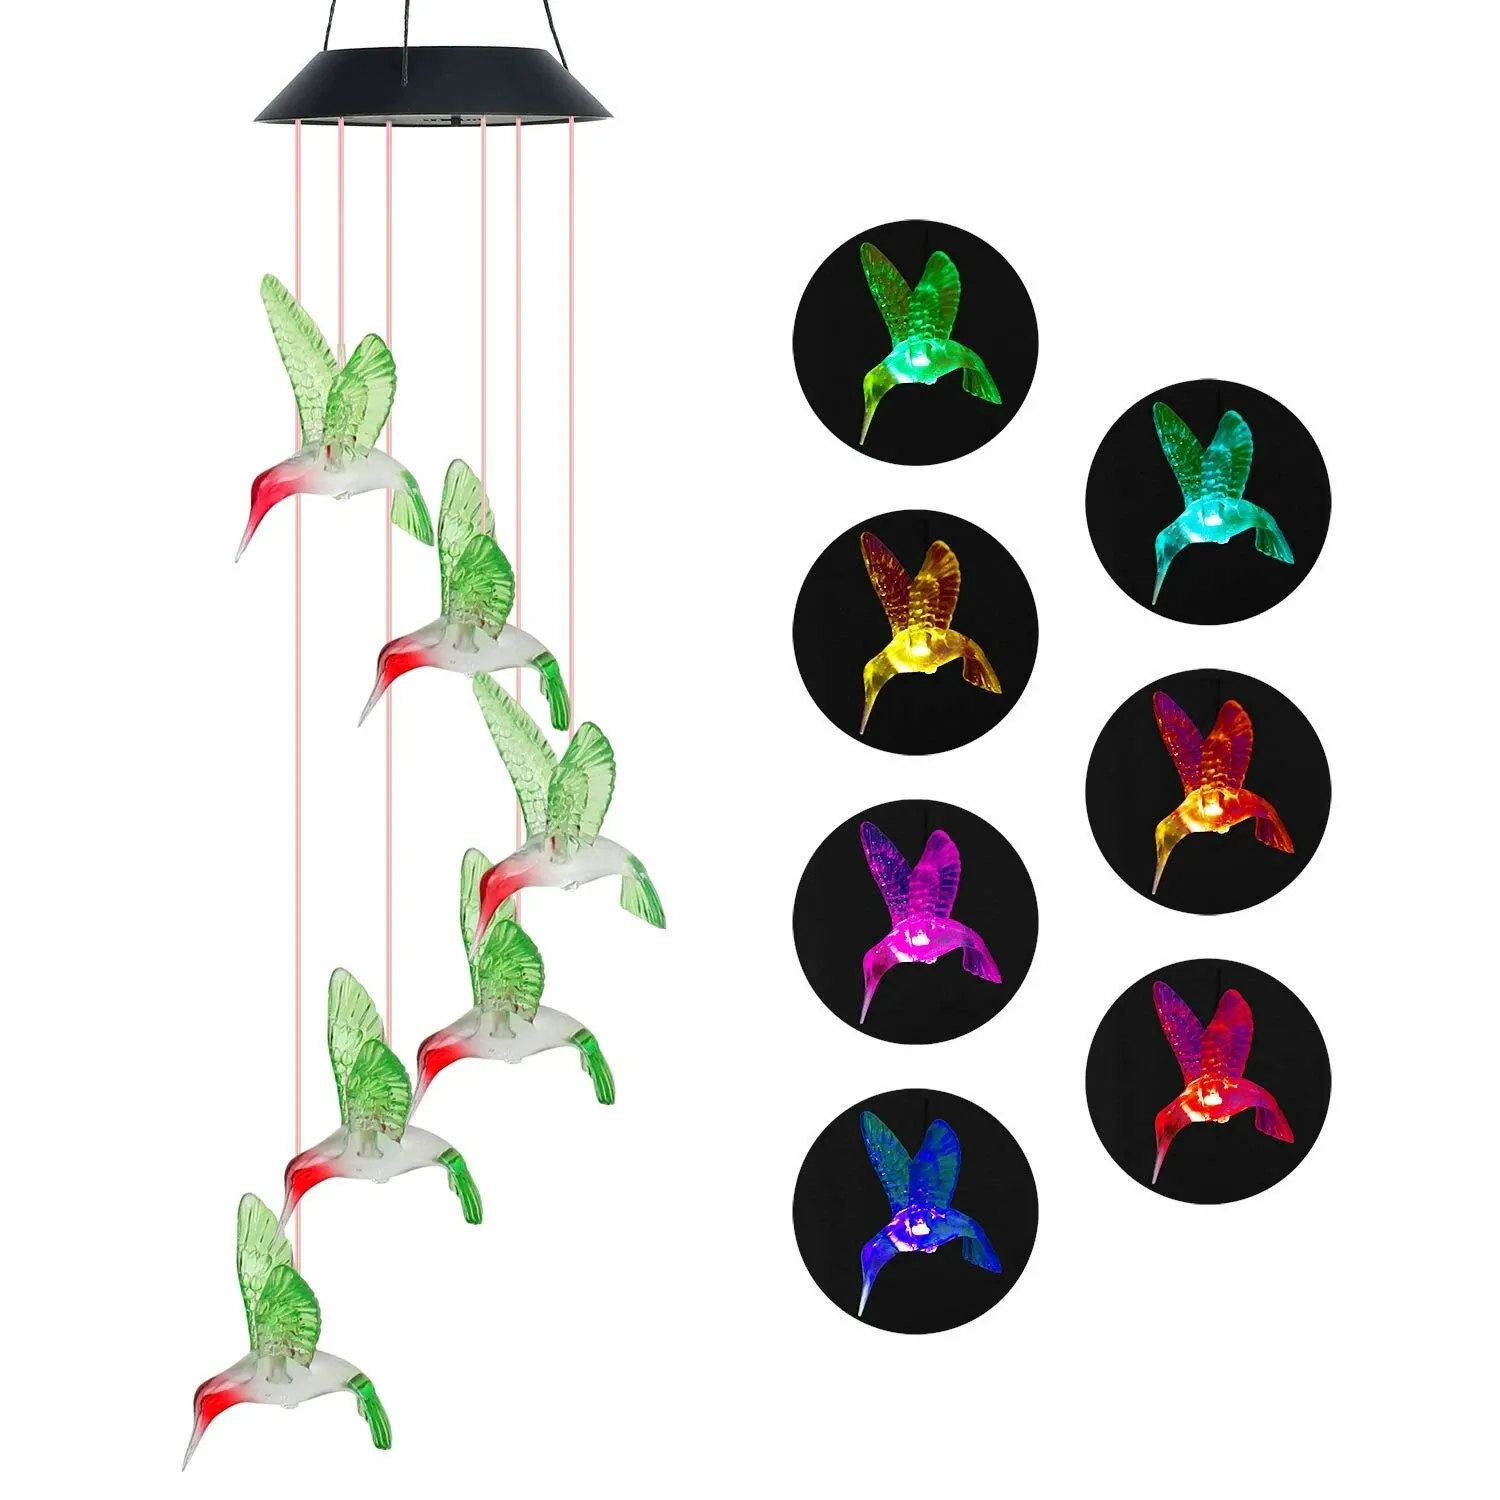 LED Solar Light Waterproof Outdoor Hanging Colorful Hummingbird Bell Wind Chimes Lamp Decor